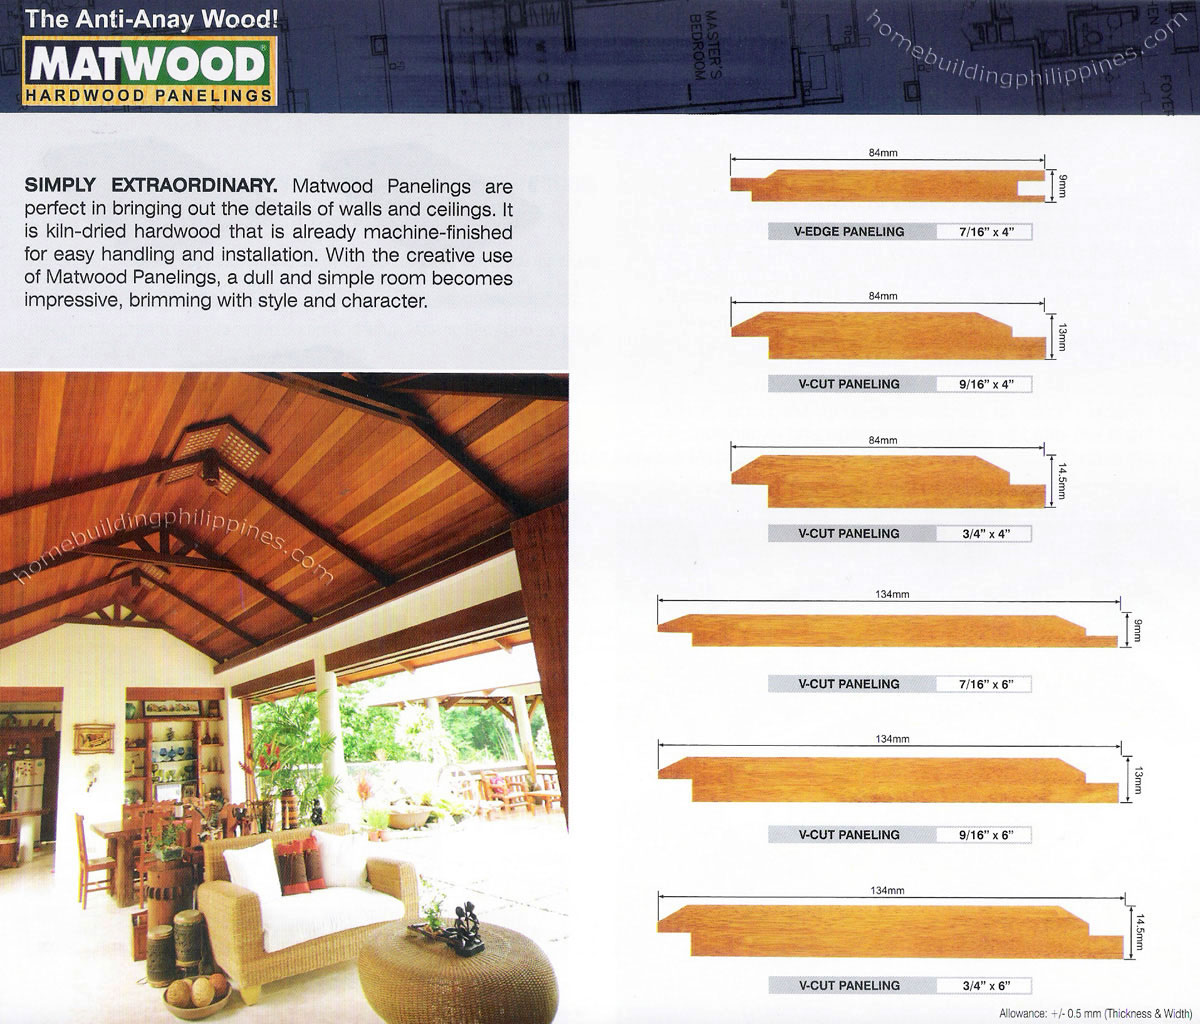 Kiln-Dried Hardwood Panelings For Wall & Ceiling Philippines